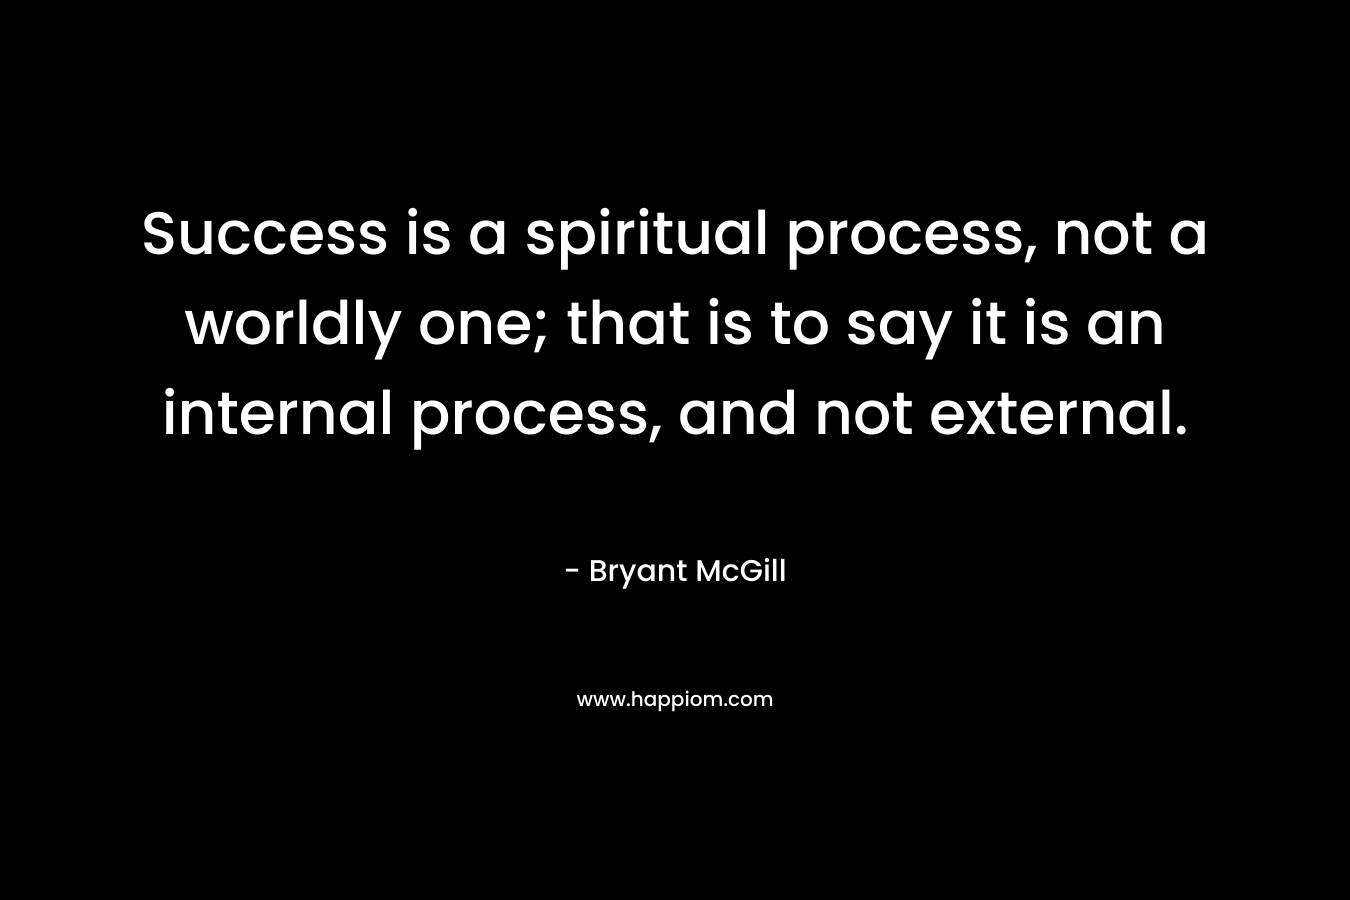 Success is a spiritual process, not a worldly one; that is to say it is an internal process, and not external.